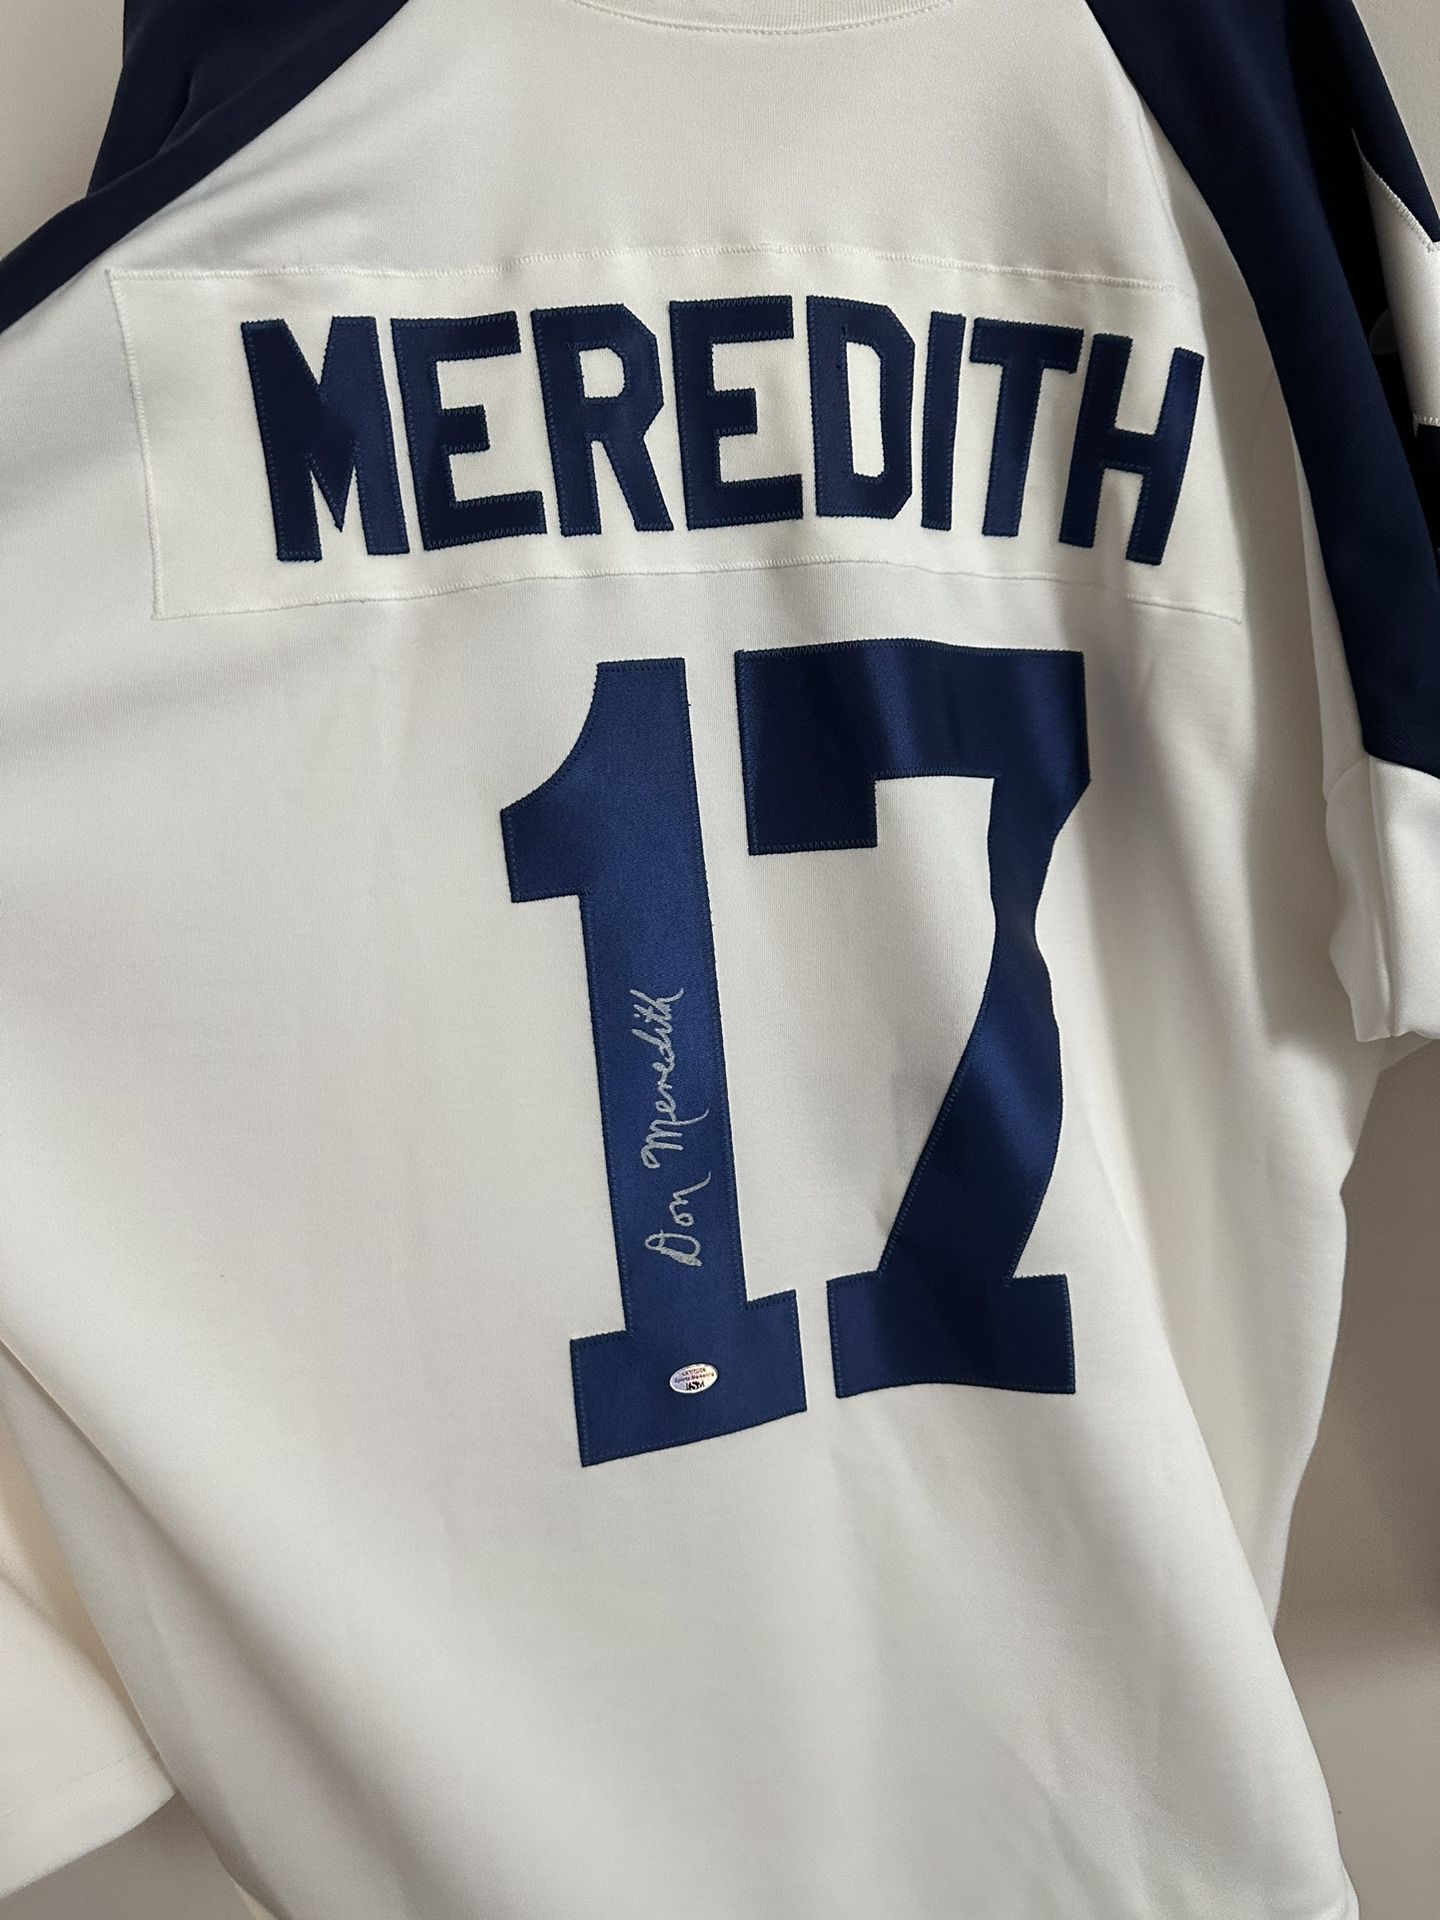 Dallas Cowboys Don Meredith #17 Signed Jersey w COA for Sale in Dallas, TX  - OfferUp